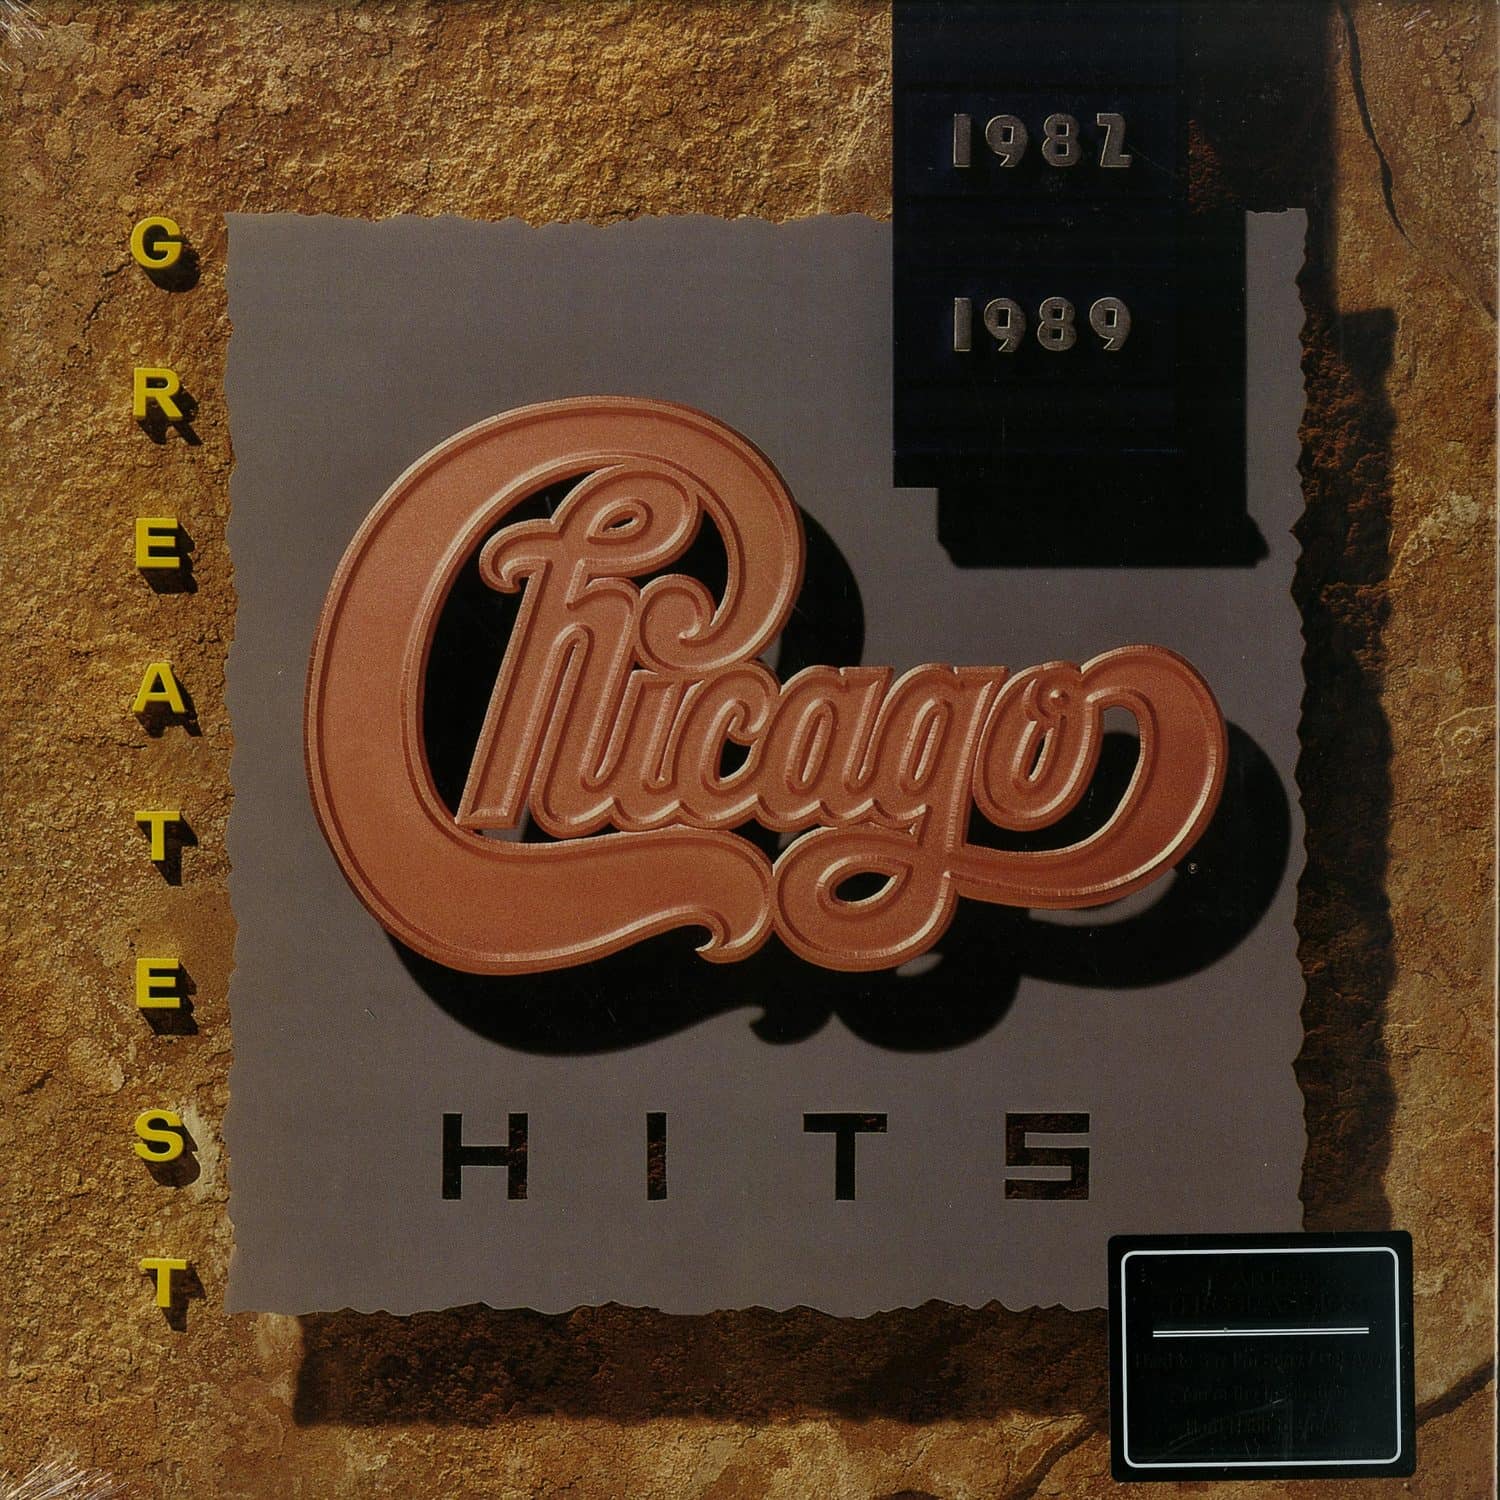 Chicago - GREATEST HITS 1982-1989 